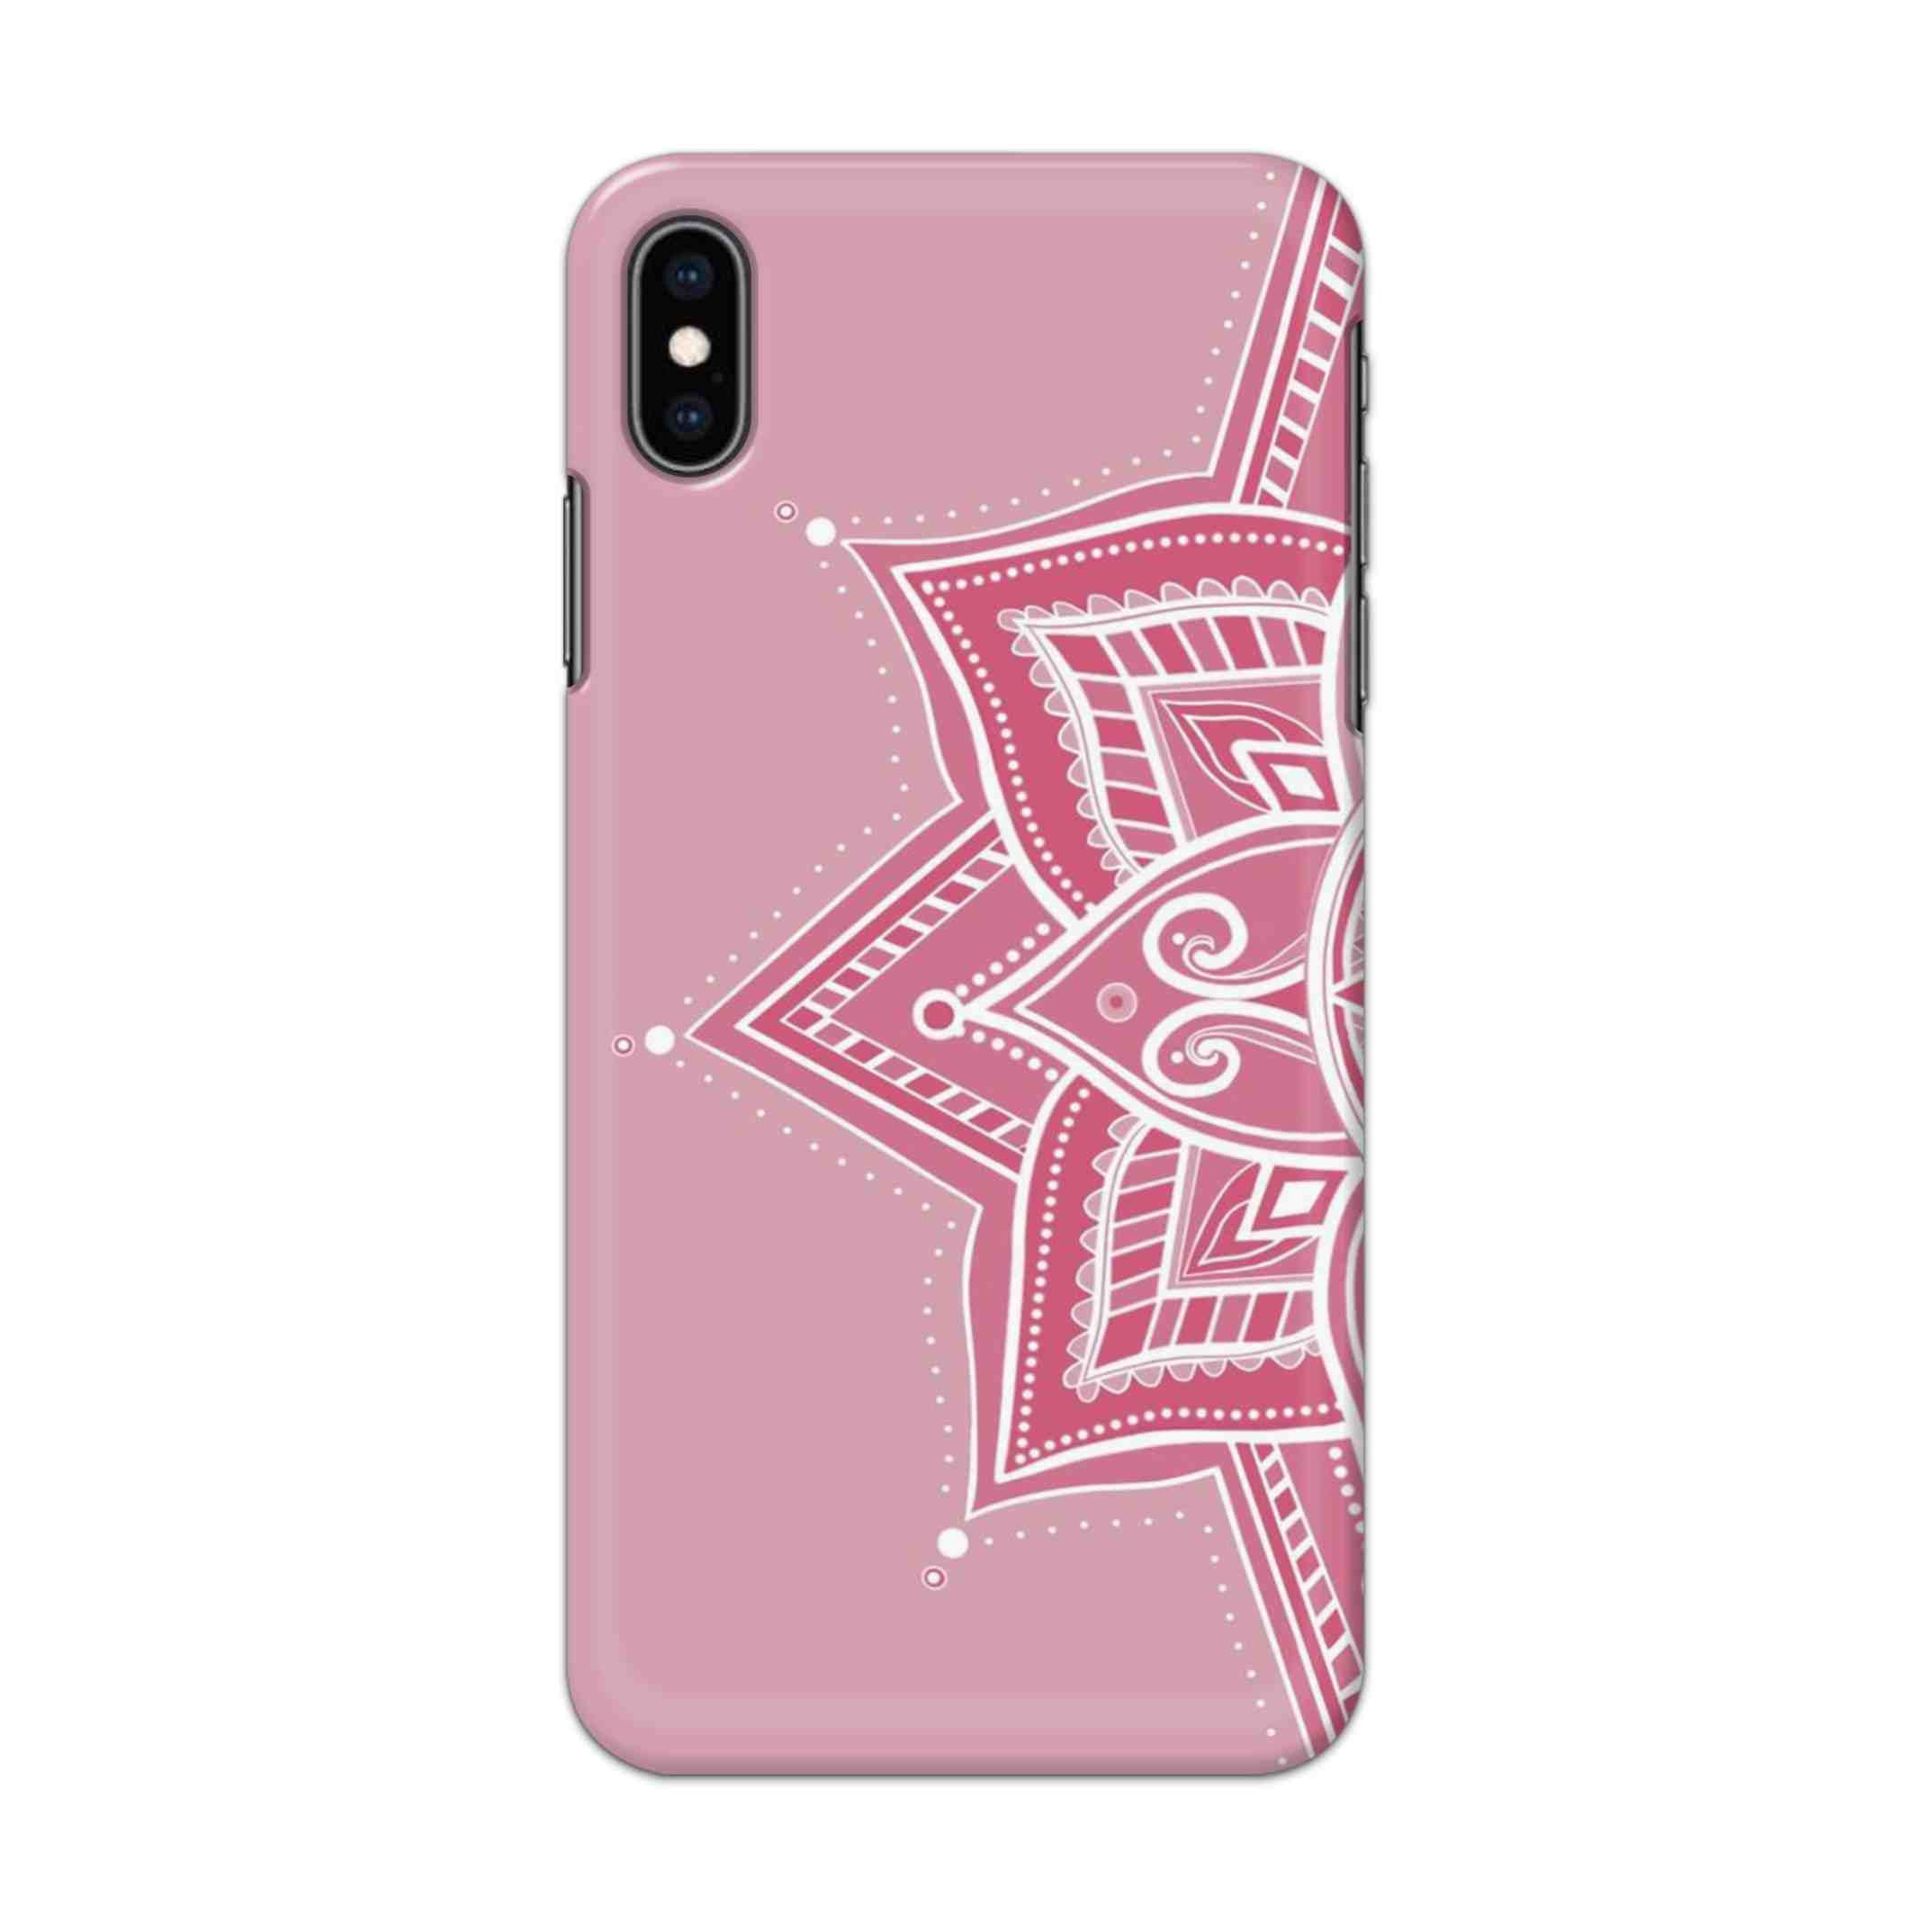 Buy Pink Rangoli Hard Back Mobile Phone Case/Cover For iPhone XS MAX Online